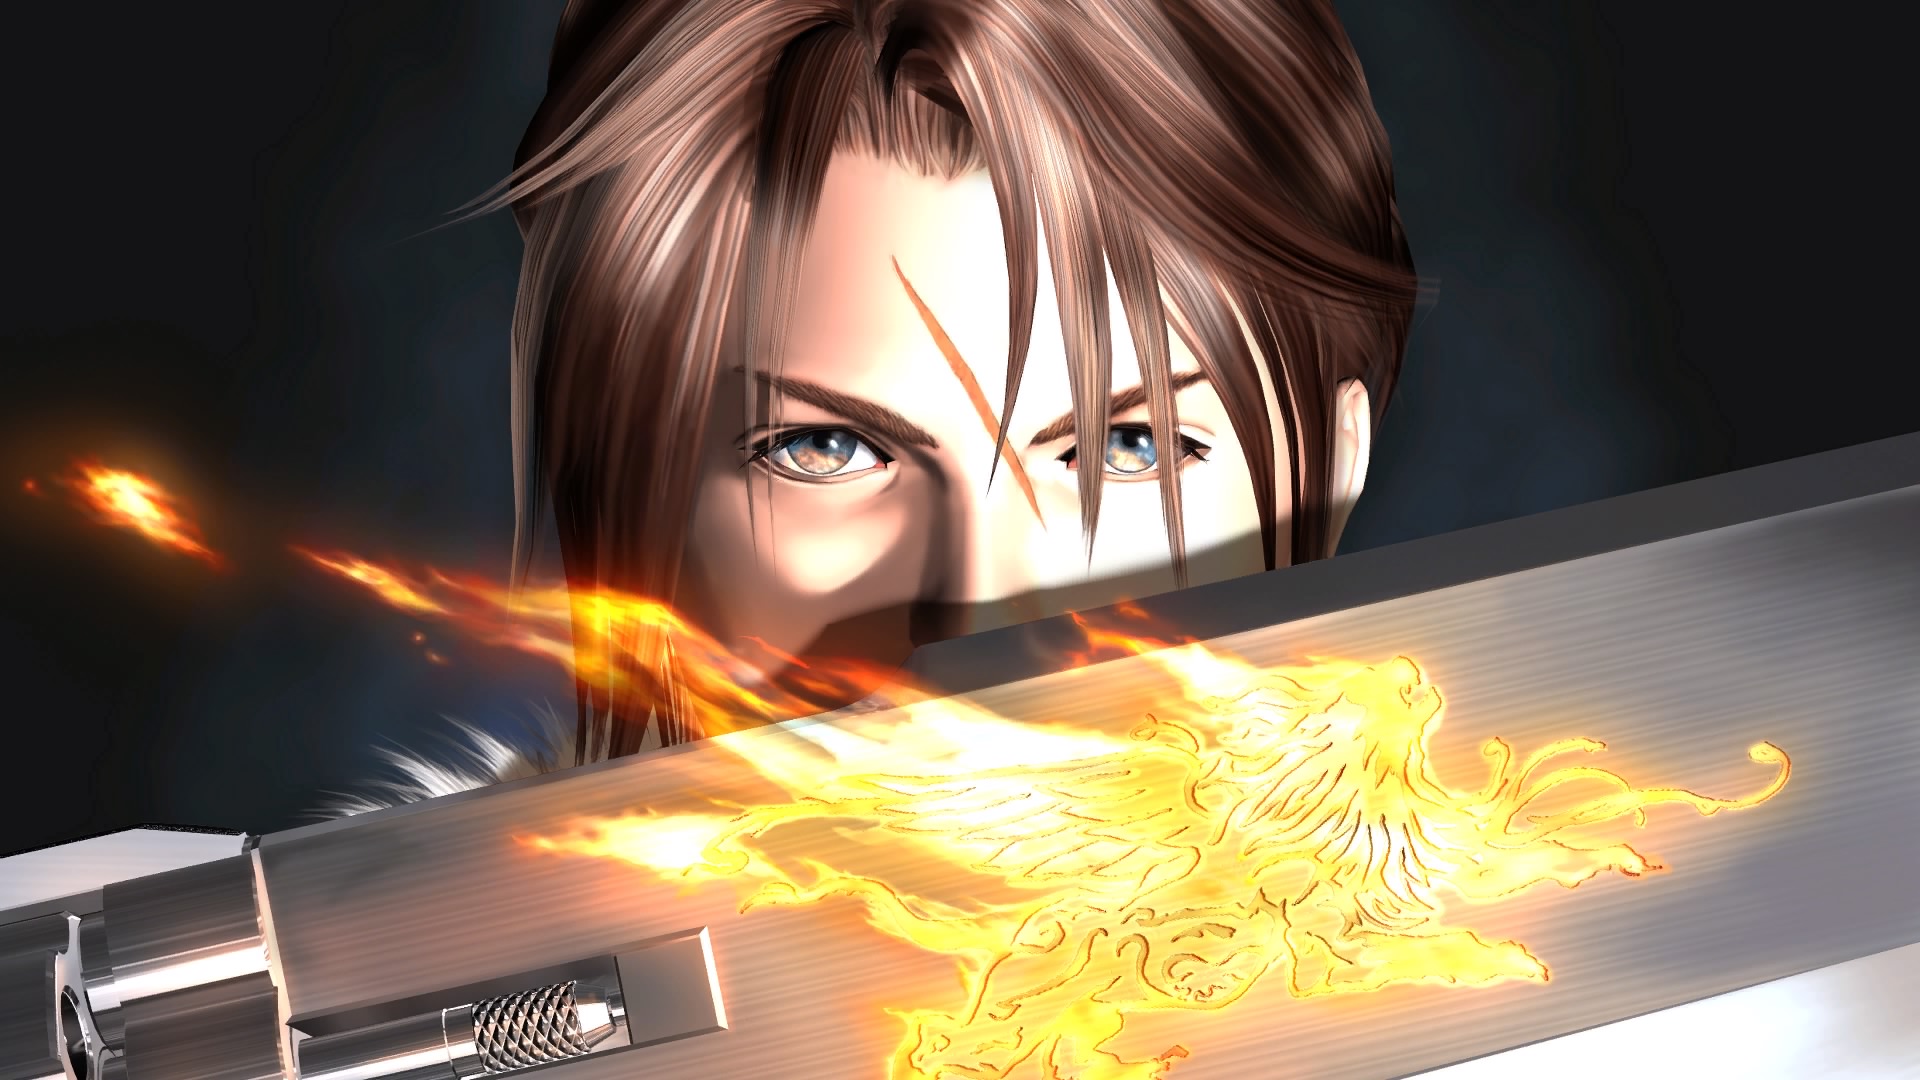 Featured onSquall Leonhart Griever UserJohnnyC Final Fantasy 